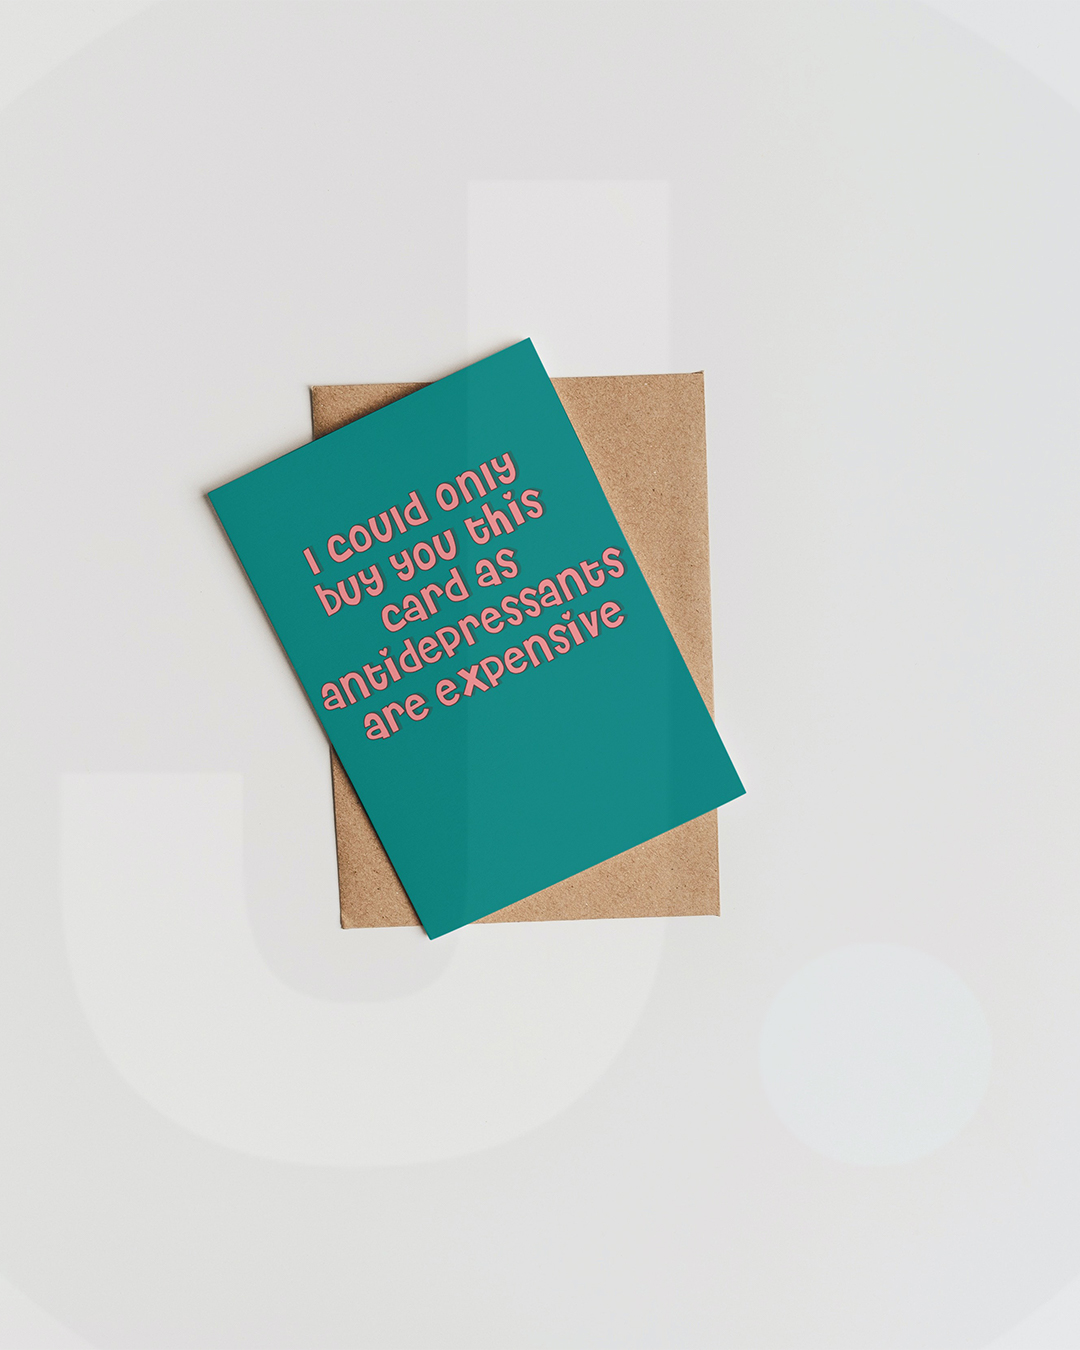 I Could Only Buy You This Card As Antidepressants Are Expensive Card - Amusing Antidepressants Mental Health Funny Greetings Card - Mental Health Funny Greetings Card